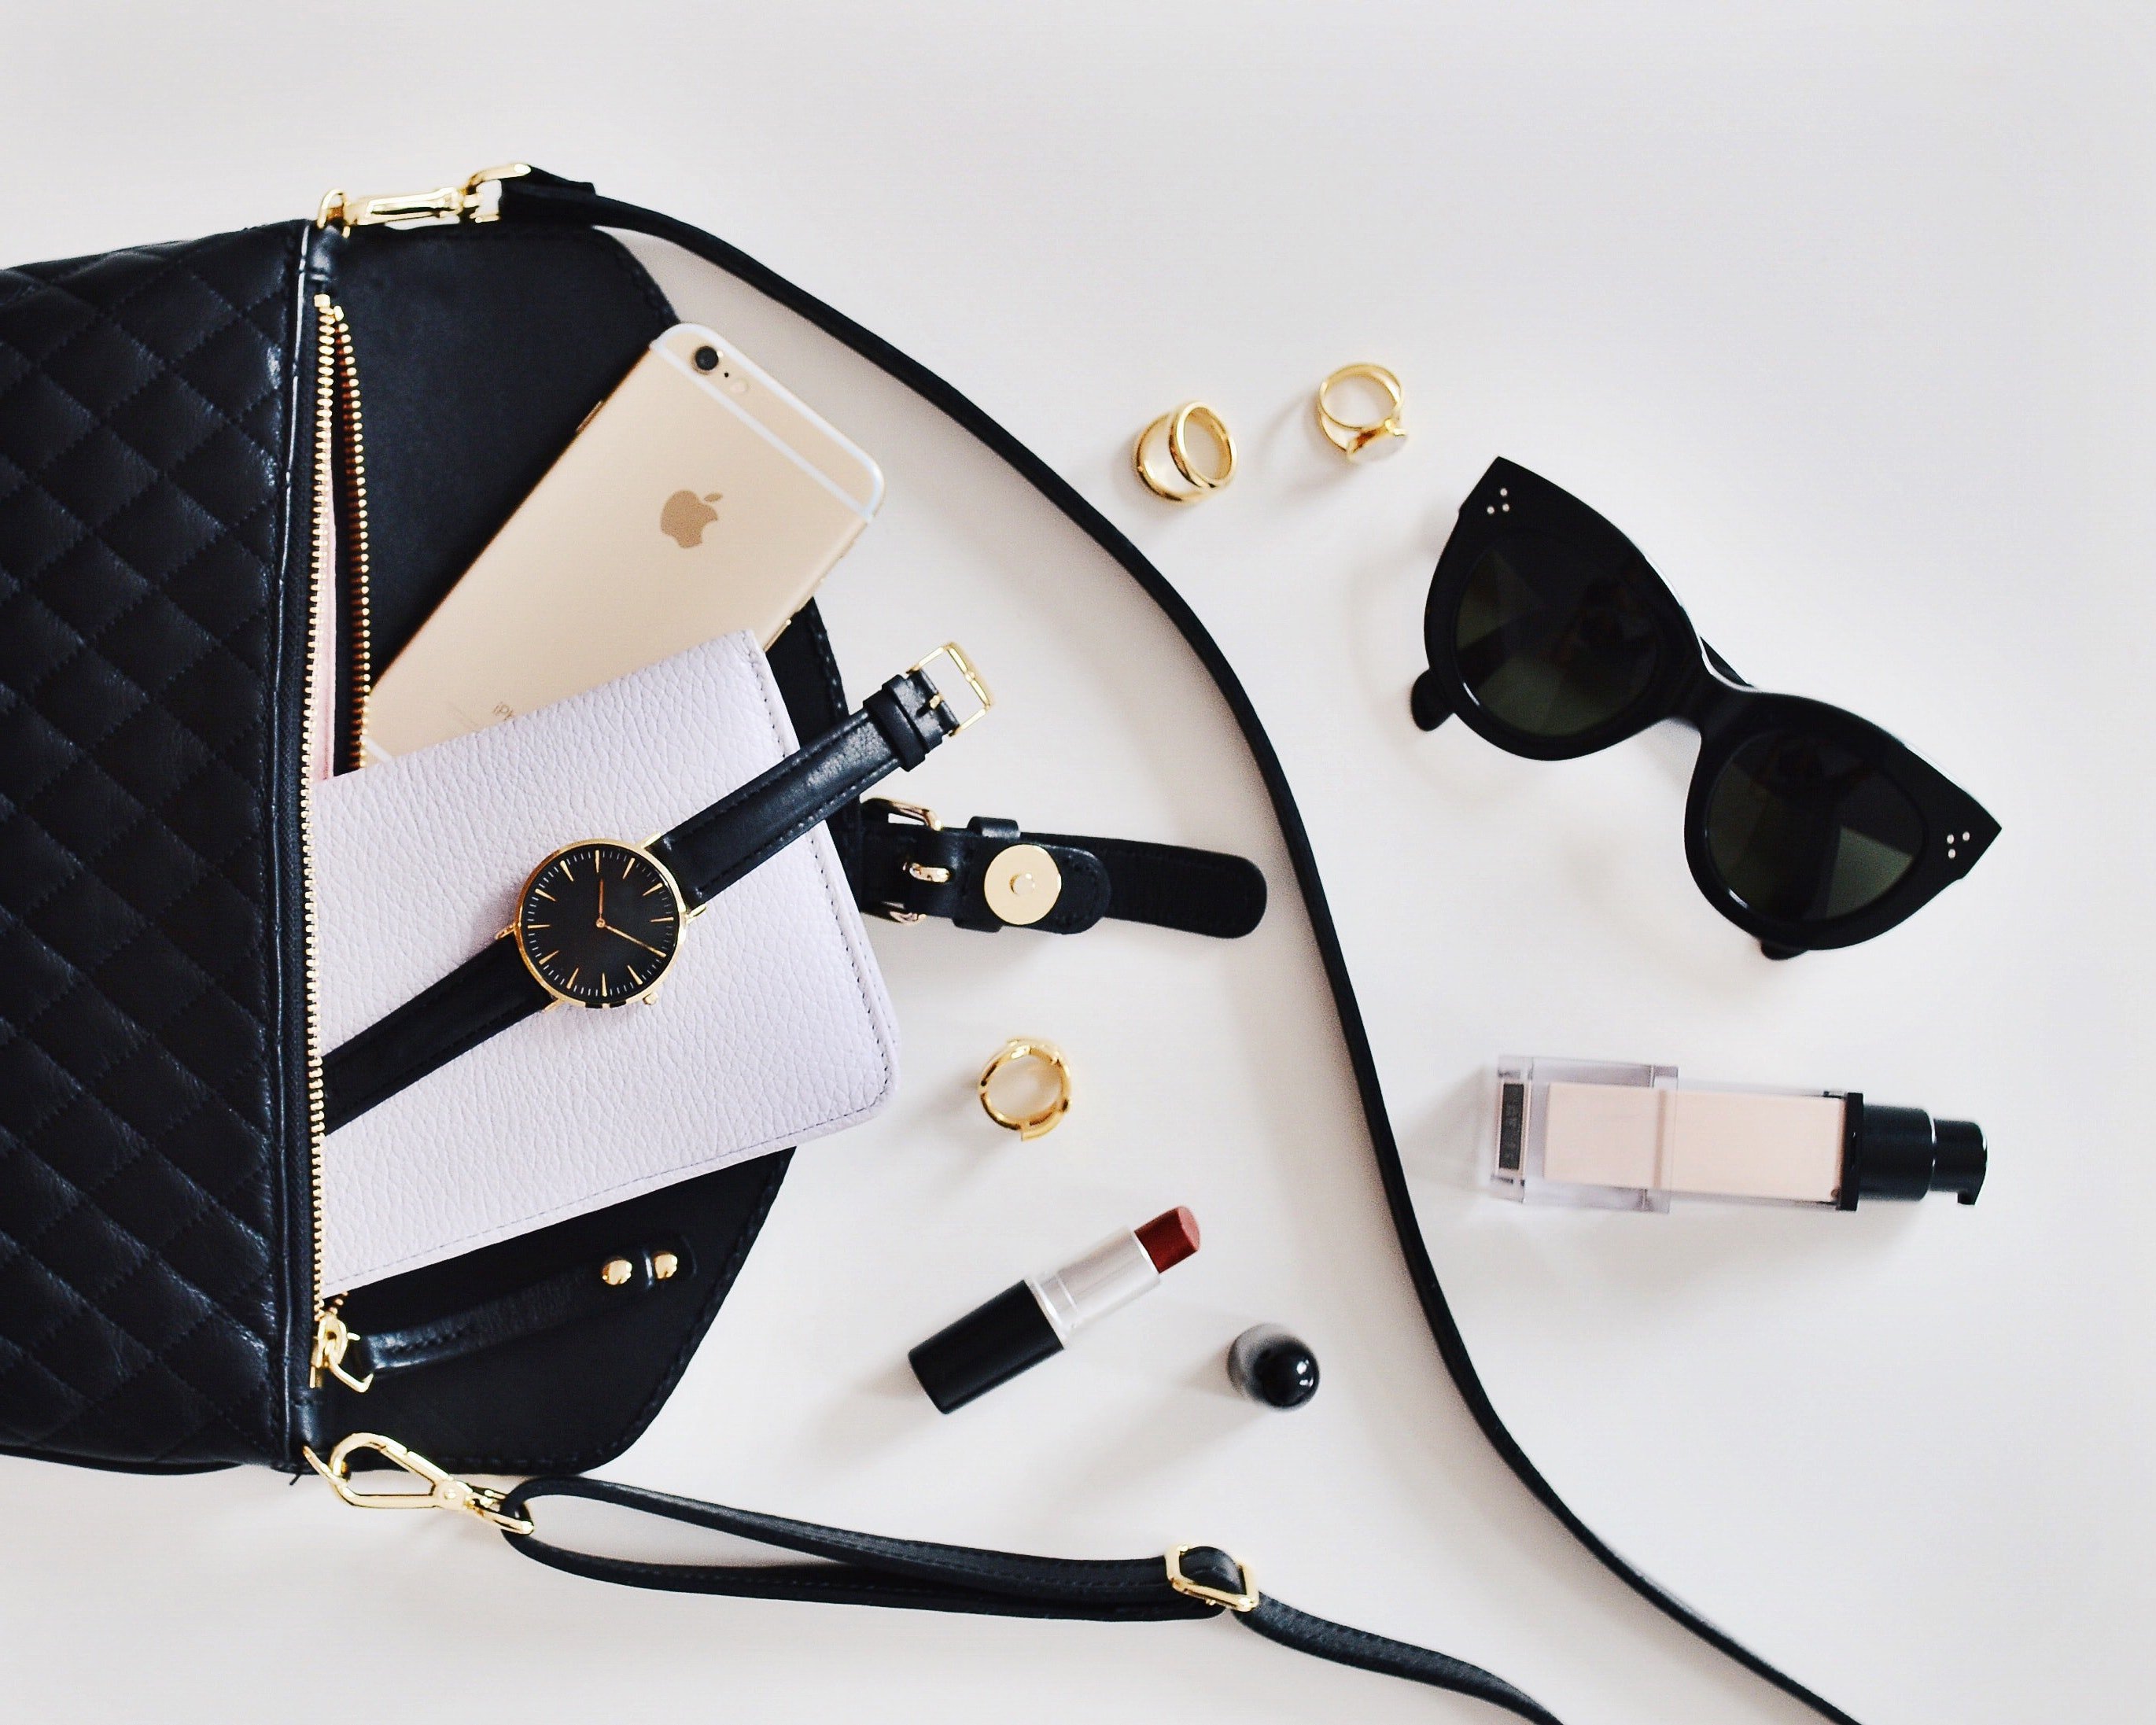 Women's sunglasses and black bag with watch and iPhone 6